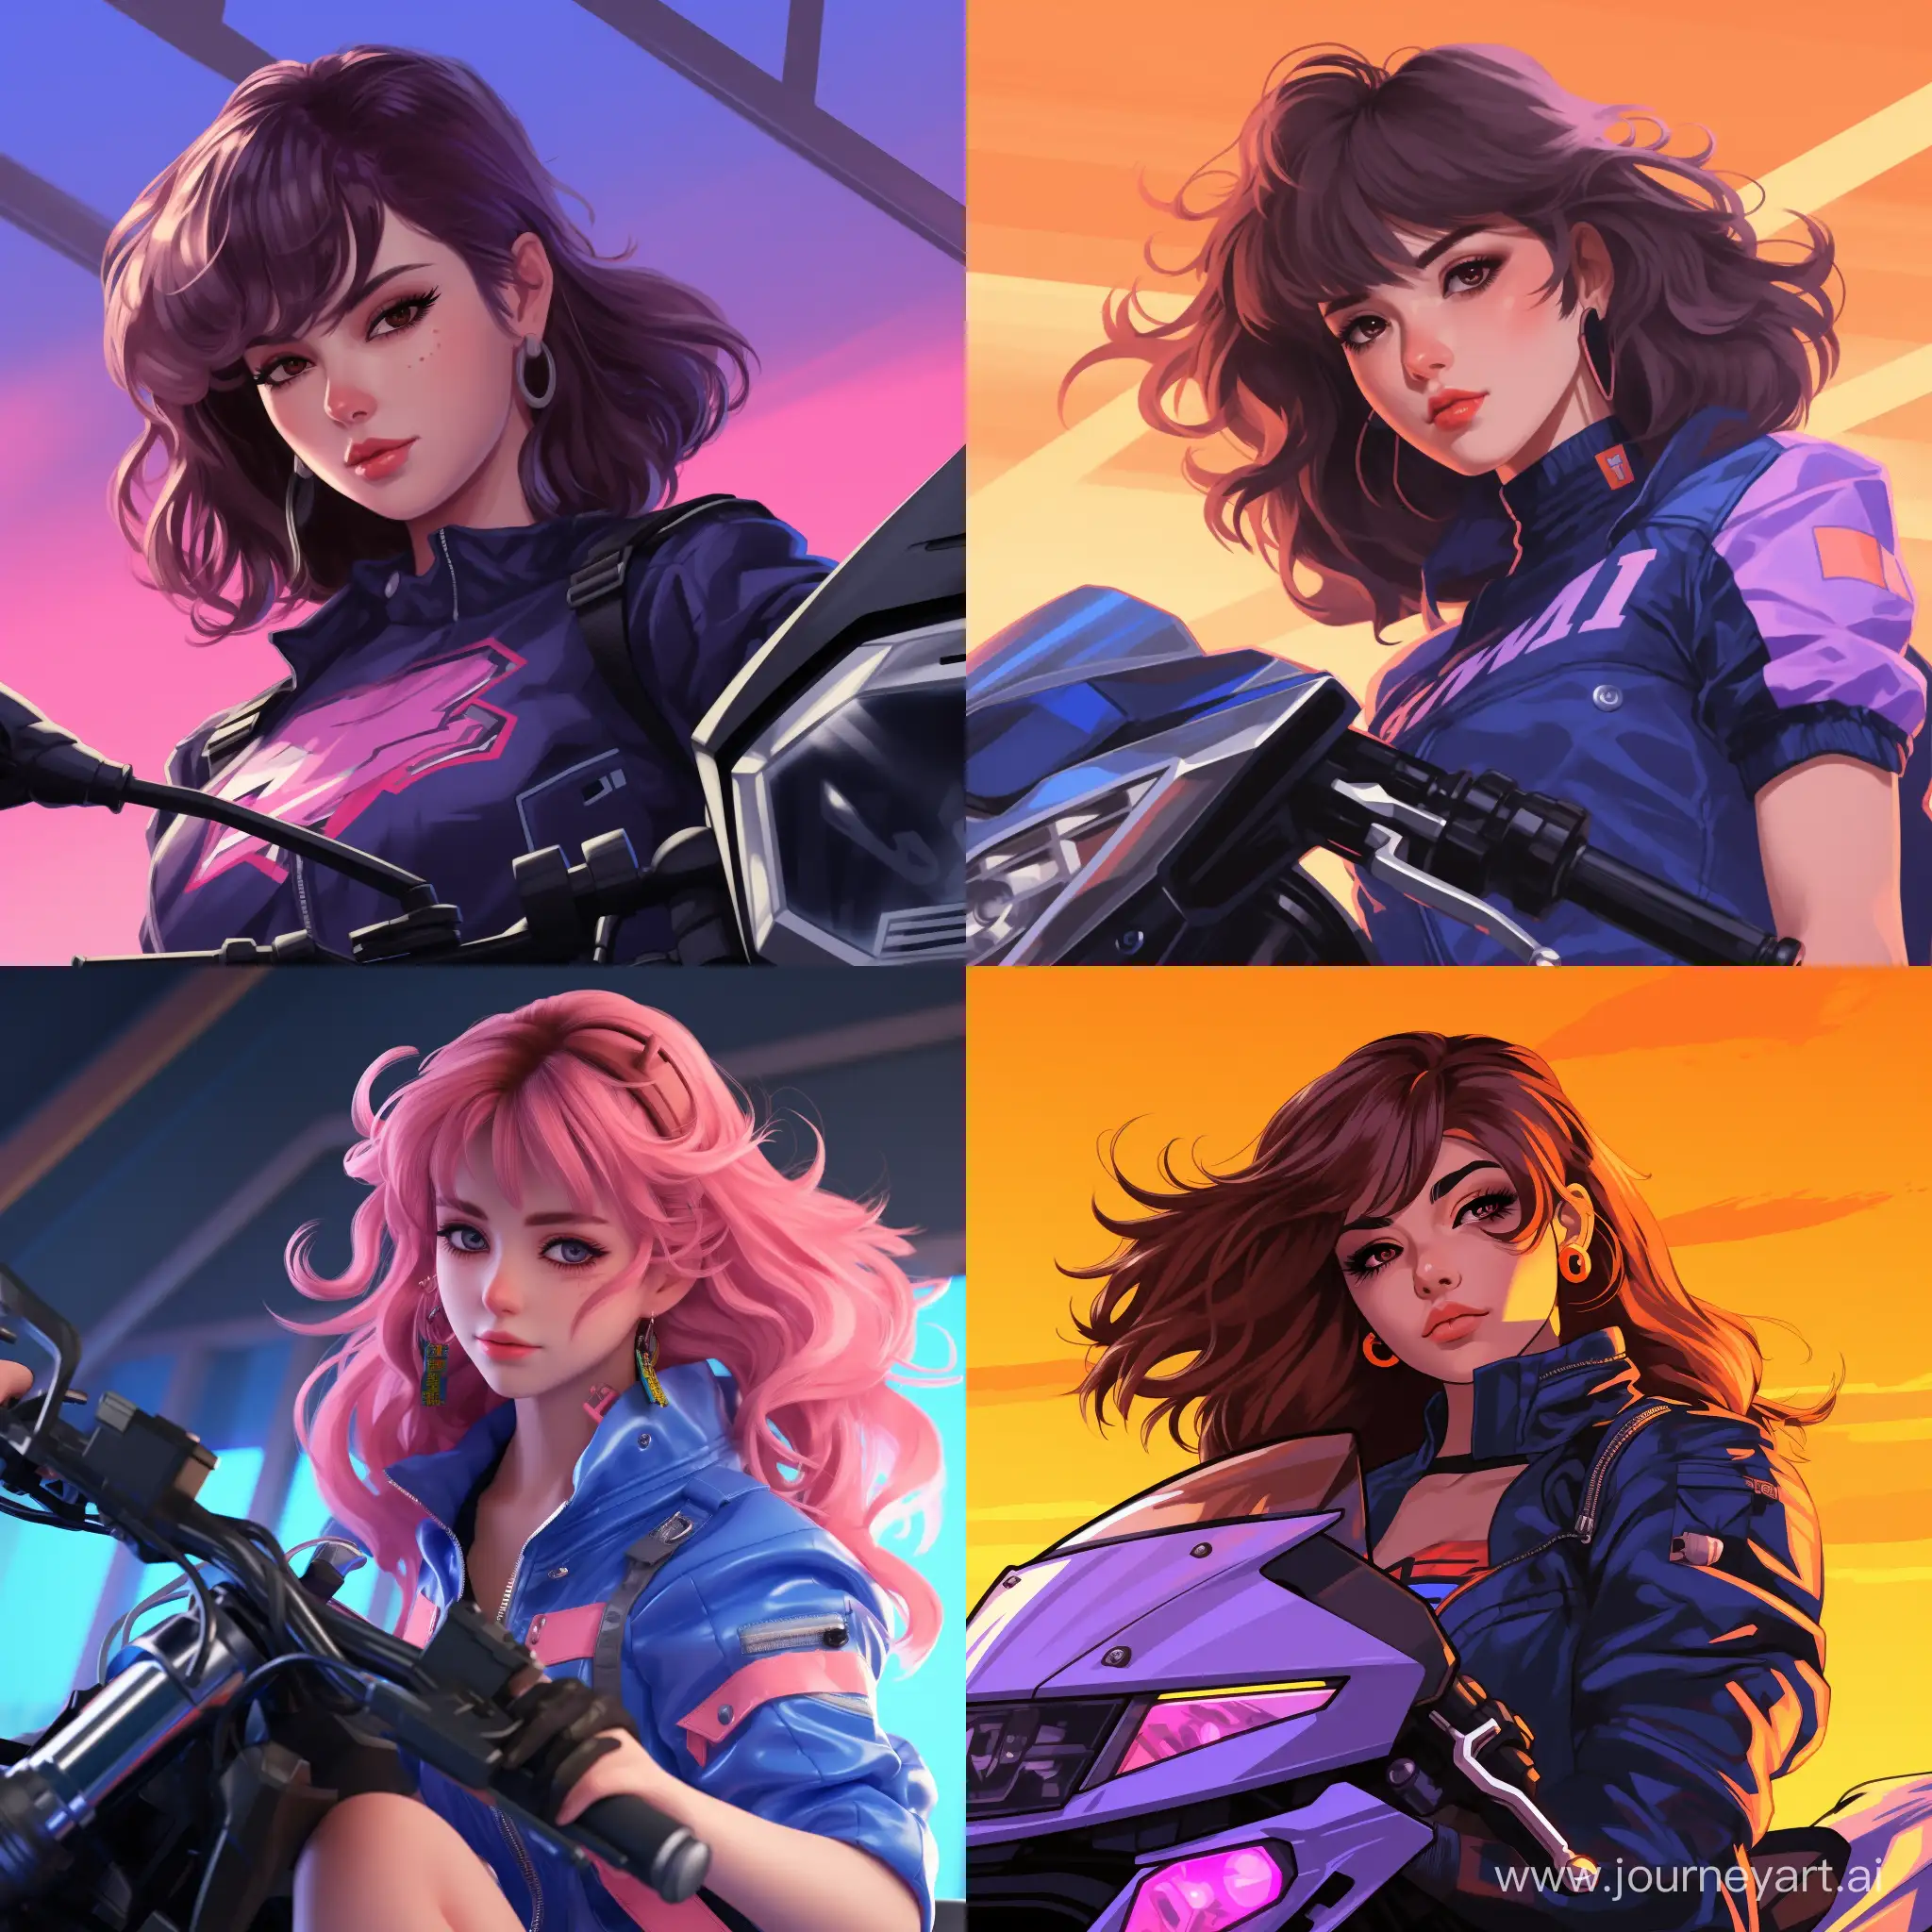 Stylish-80s-AnimeInspired-Sports-Motorcycle-Ride-with-a-Beautiful-Girl